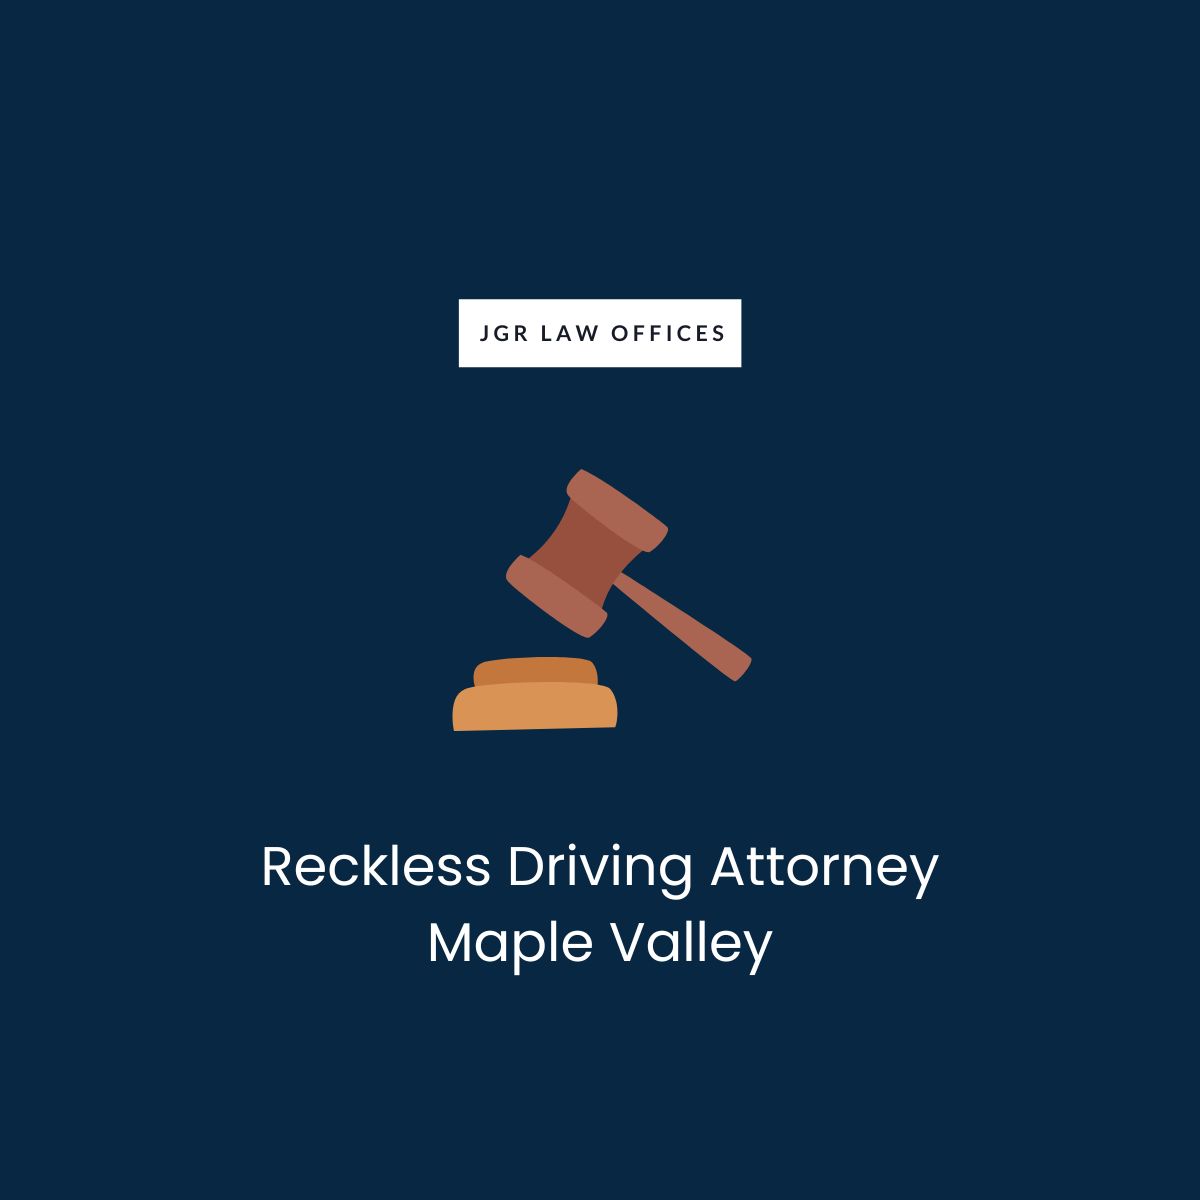 Reckless Driving Attorney Maple Valley Reckless Driving